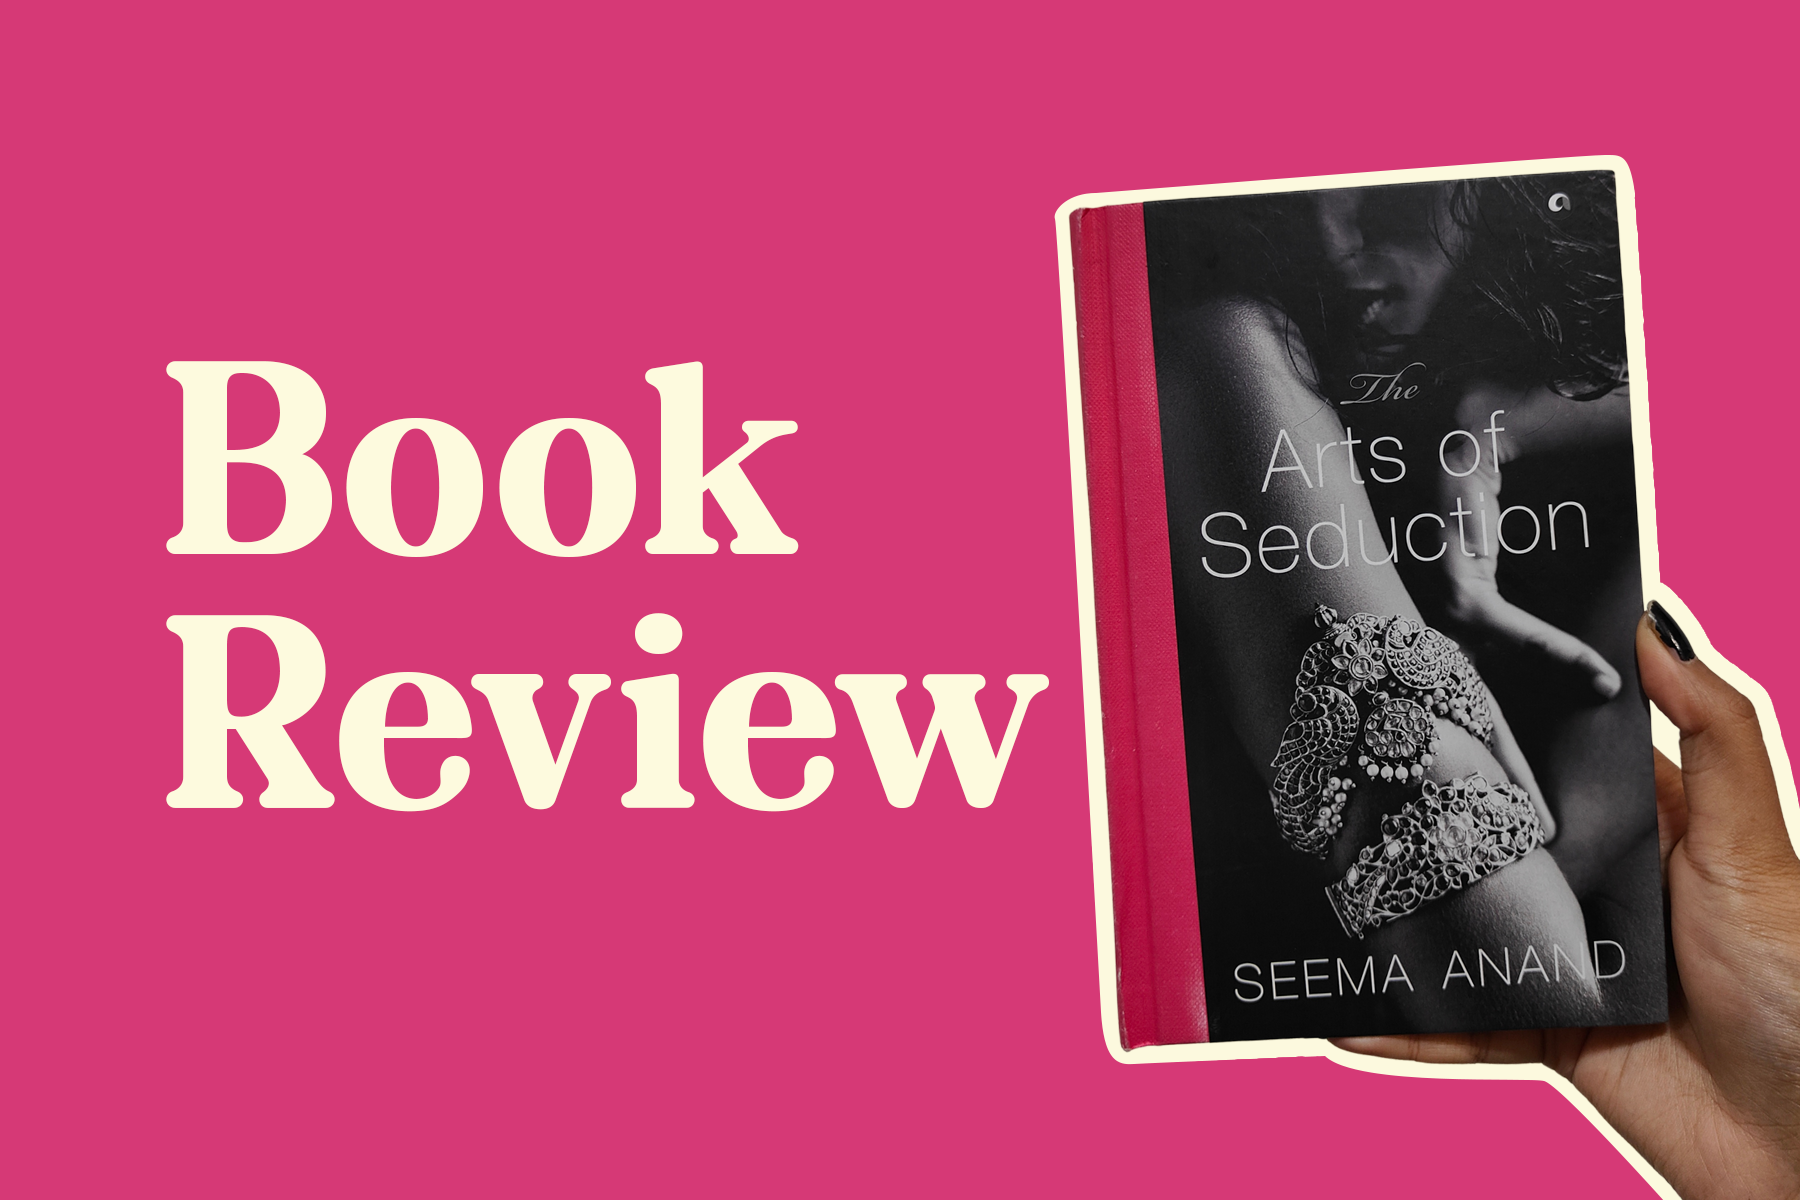 A Treasure Trove Called ‘The Arts of Seduction’ by Seema Anand